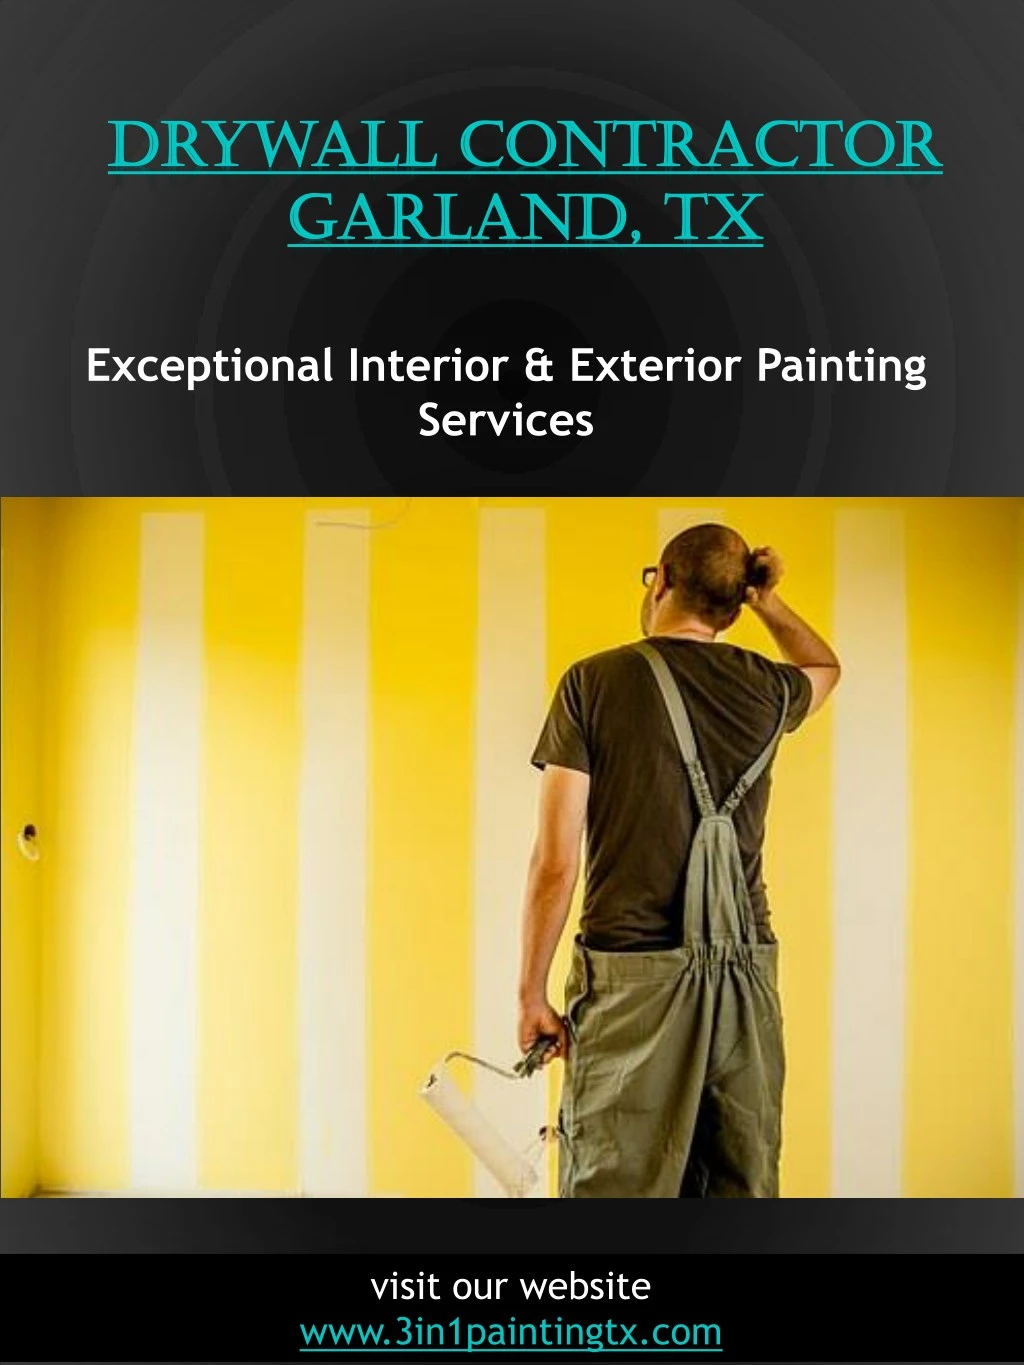 drywall contractor drywall contractor garland